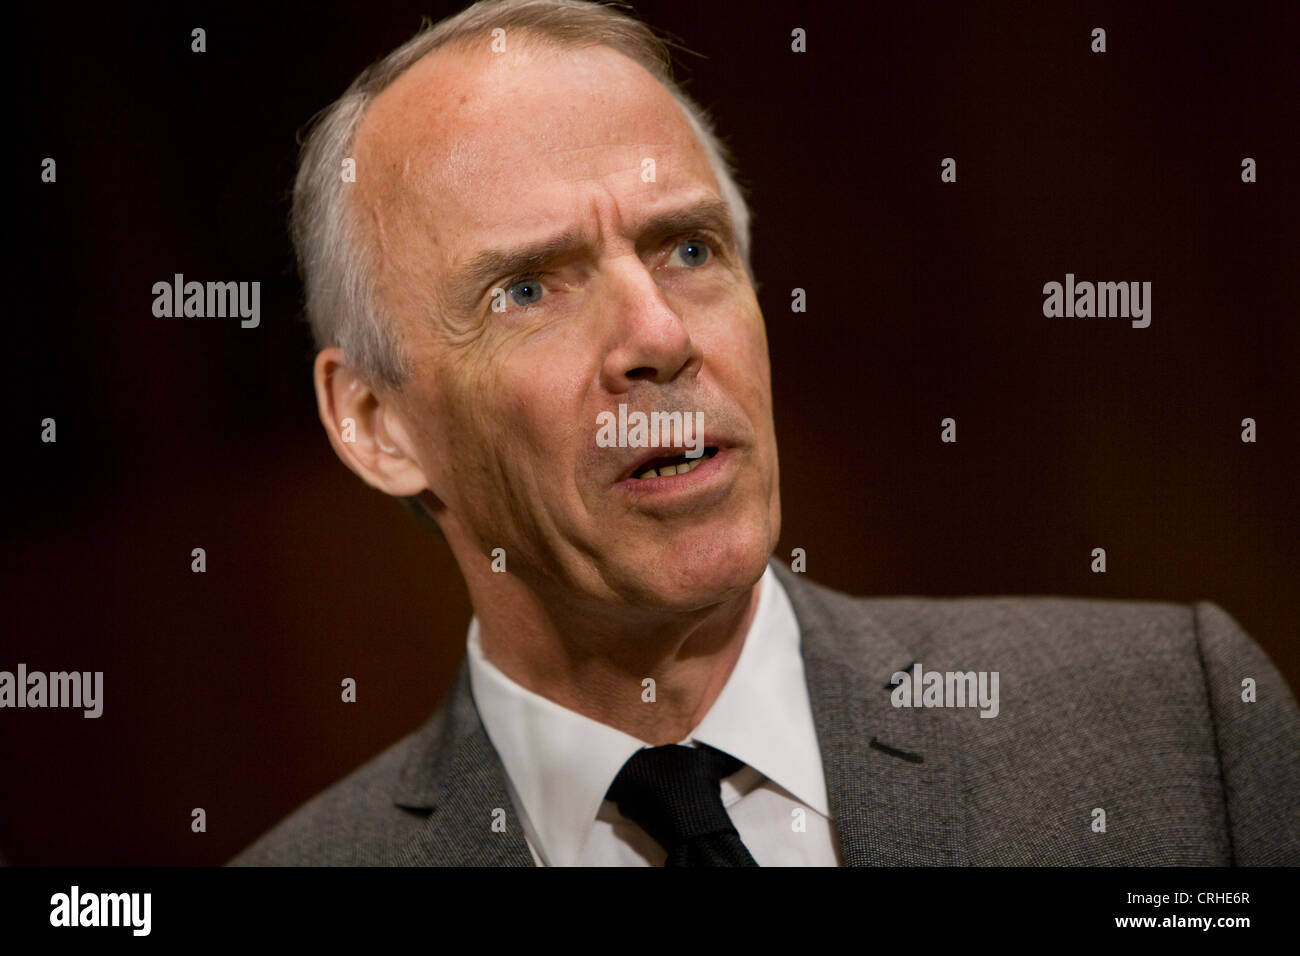 Roger Faxon, CEO of the record label EMI Group.  Stock Photo